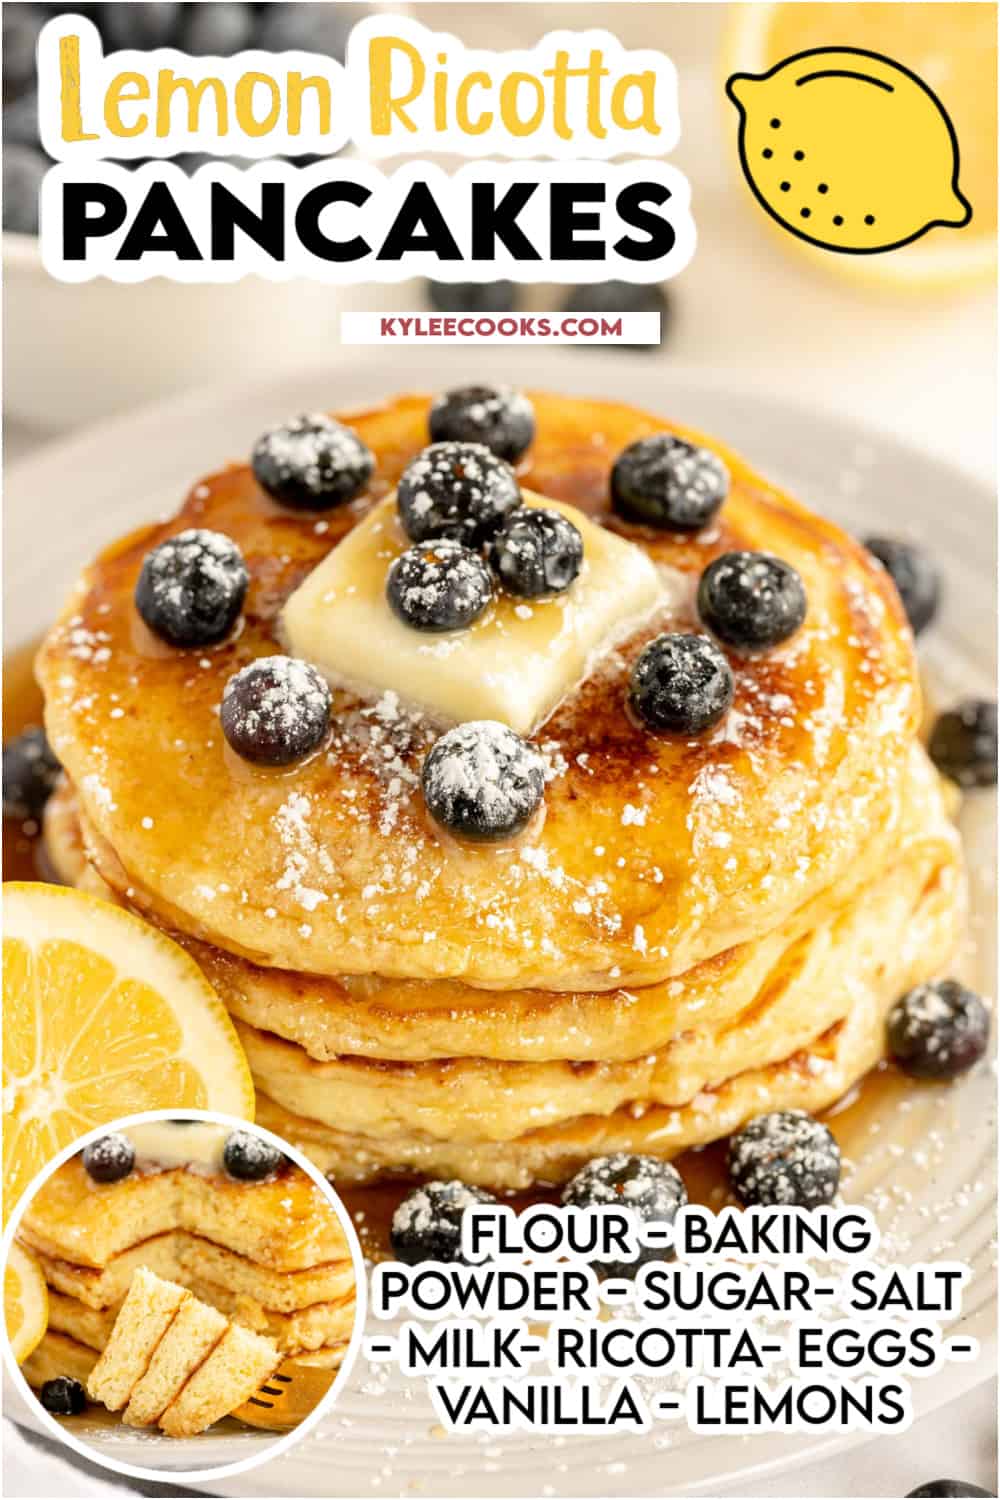 stack of pancakes with a cut lemon and blueberries with recipe name and ingredients overlaid in text.